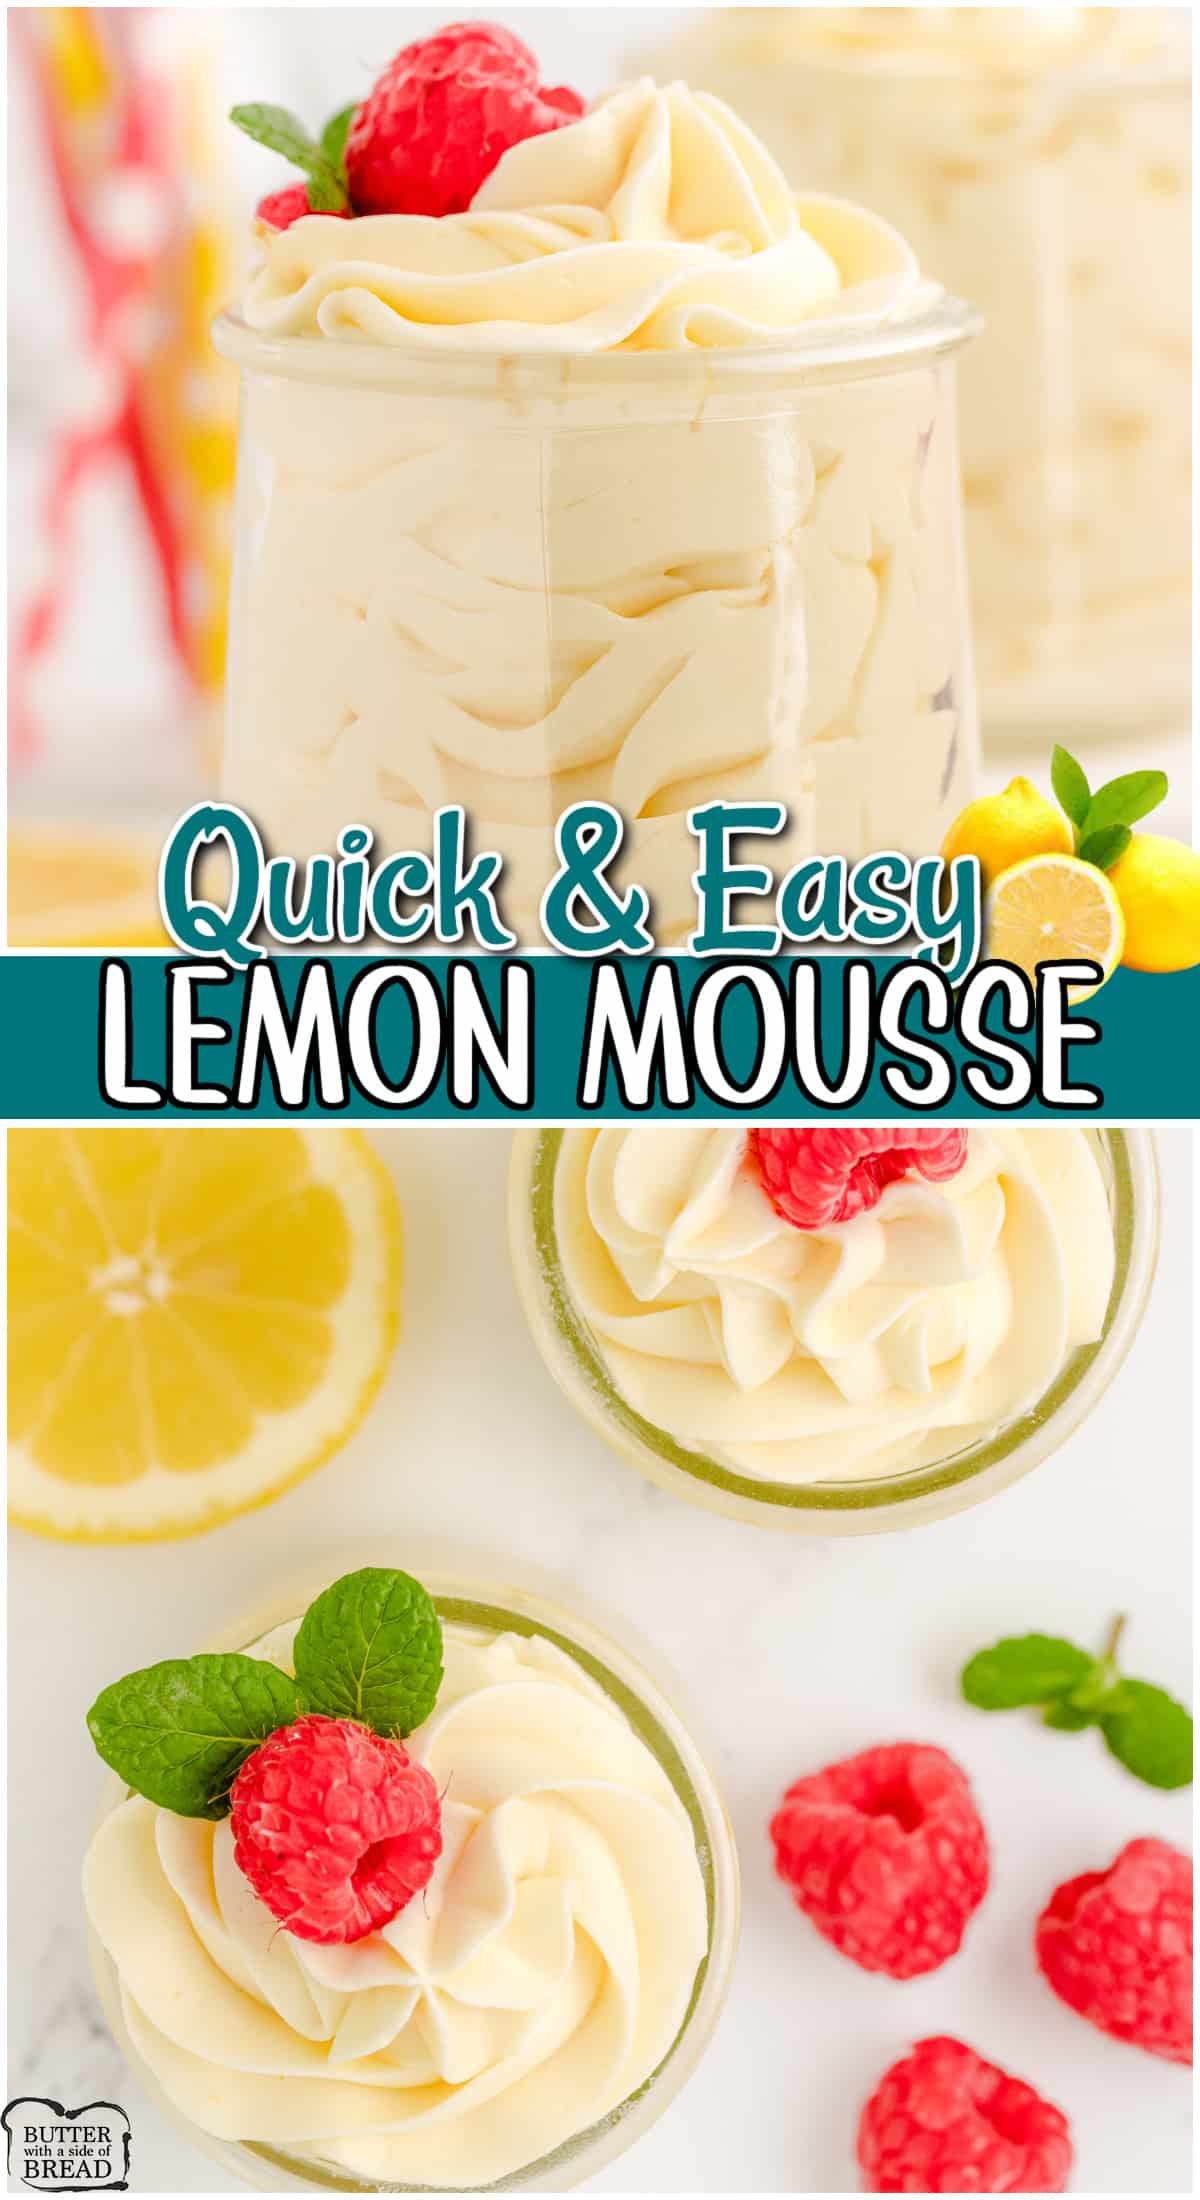 Simple recipe for Easy Lemon Mousse made with just 5 ingredients in 5 minutes! Rich, creamy and perfectly tart lemon mousse is the perfect Spring dessert!